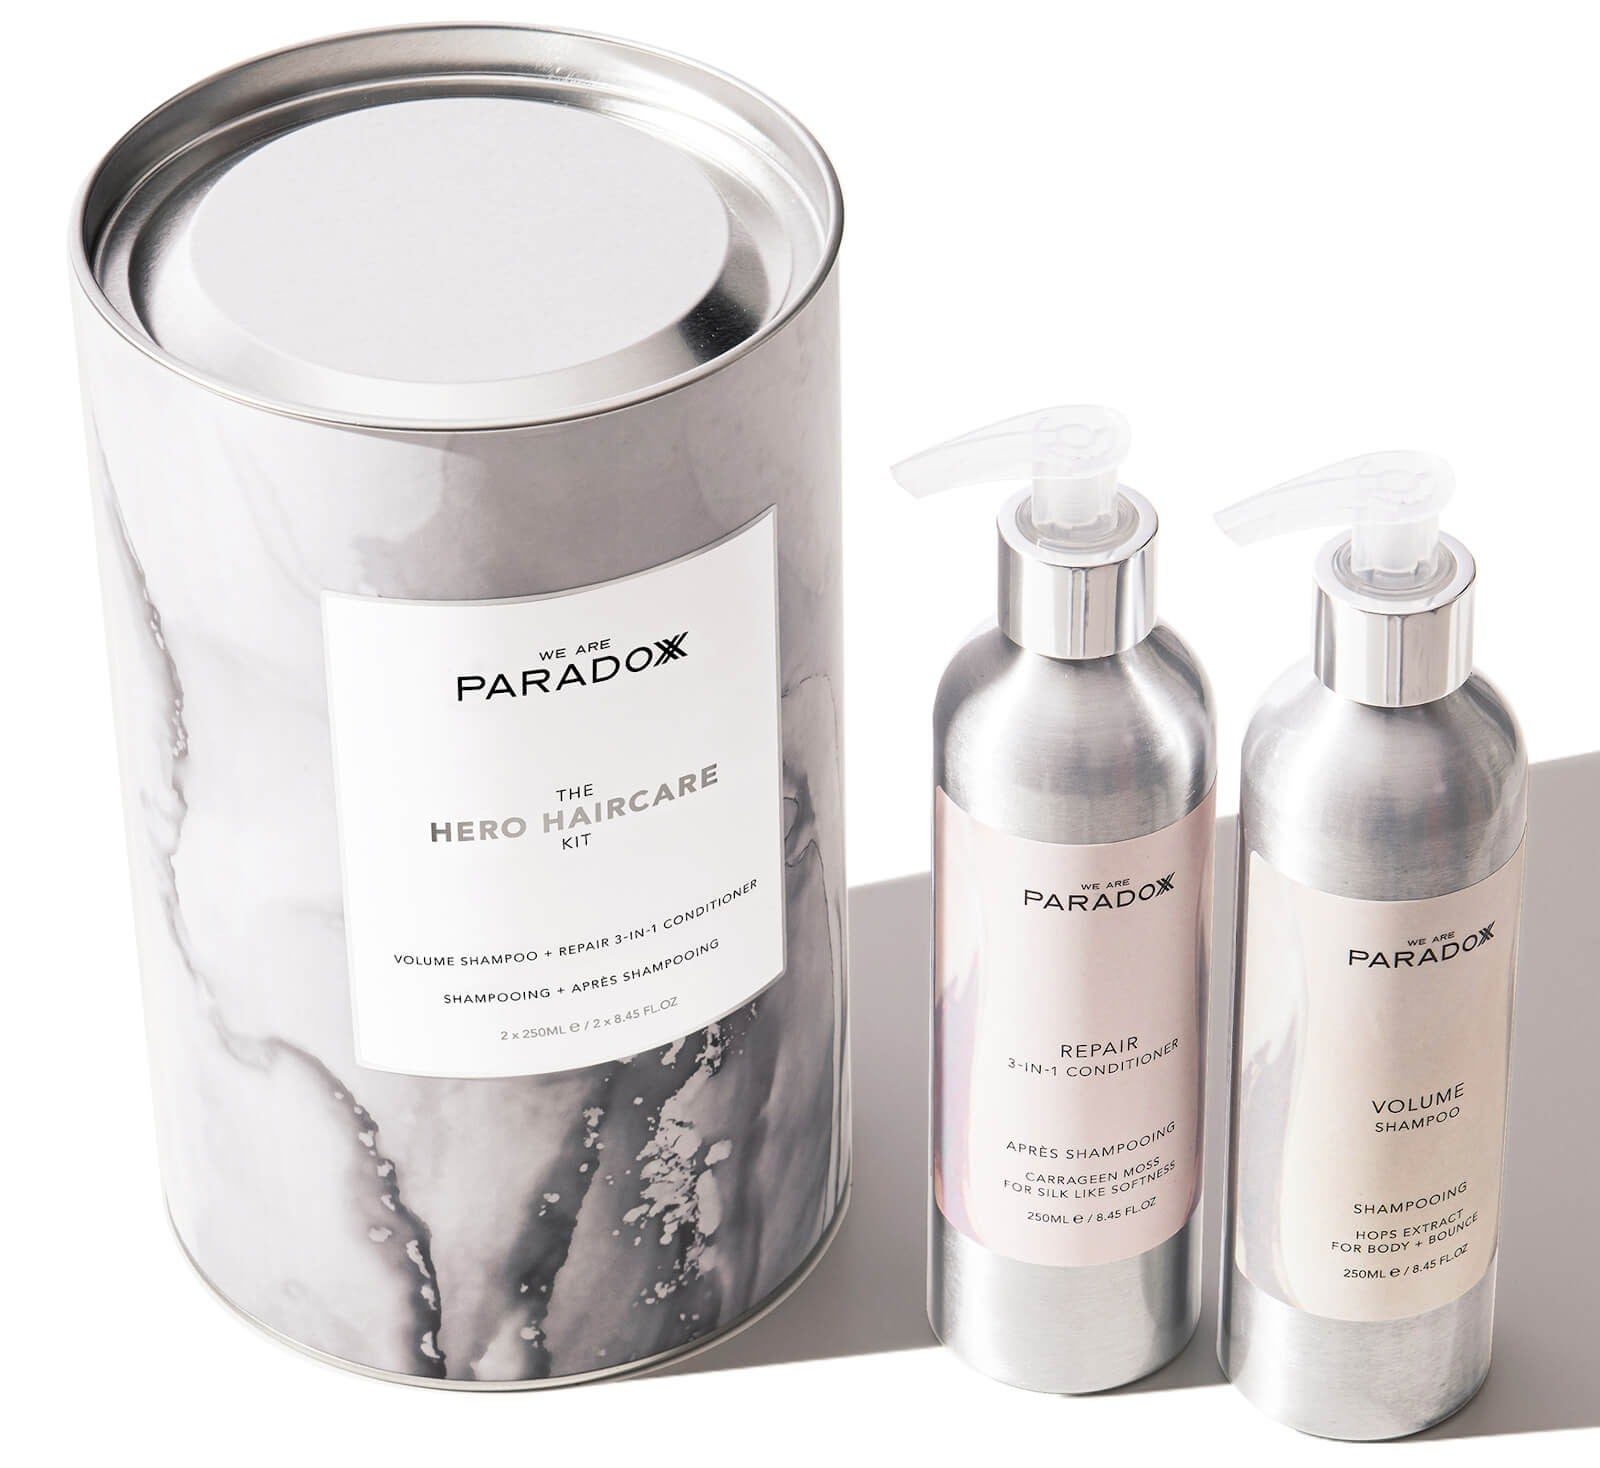 We Are Paradoxx The Hero Haircare Kit